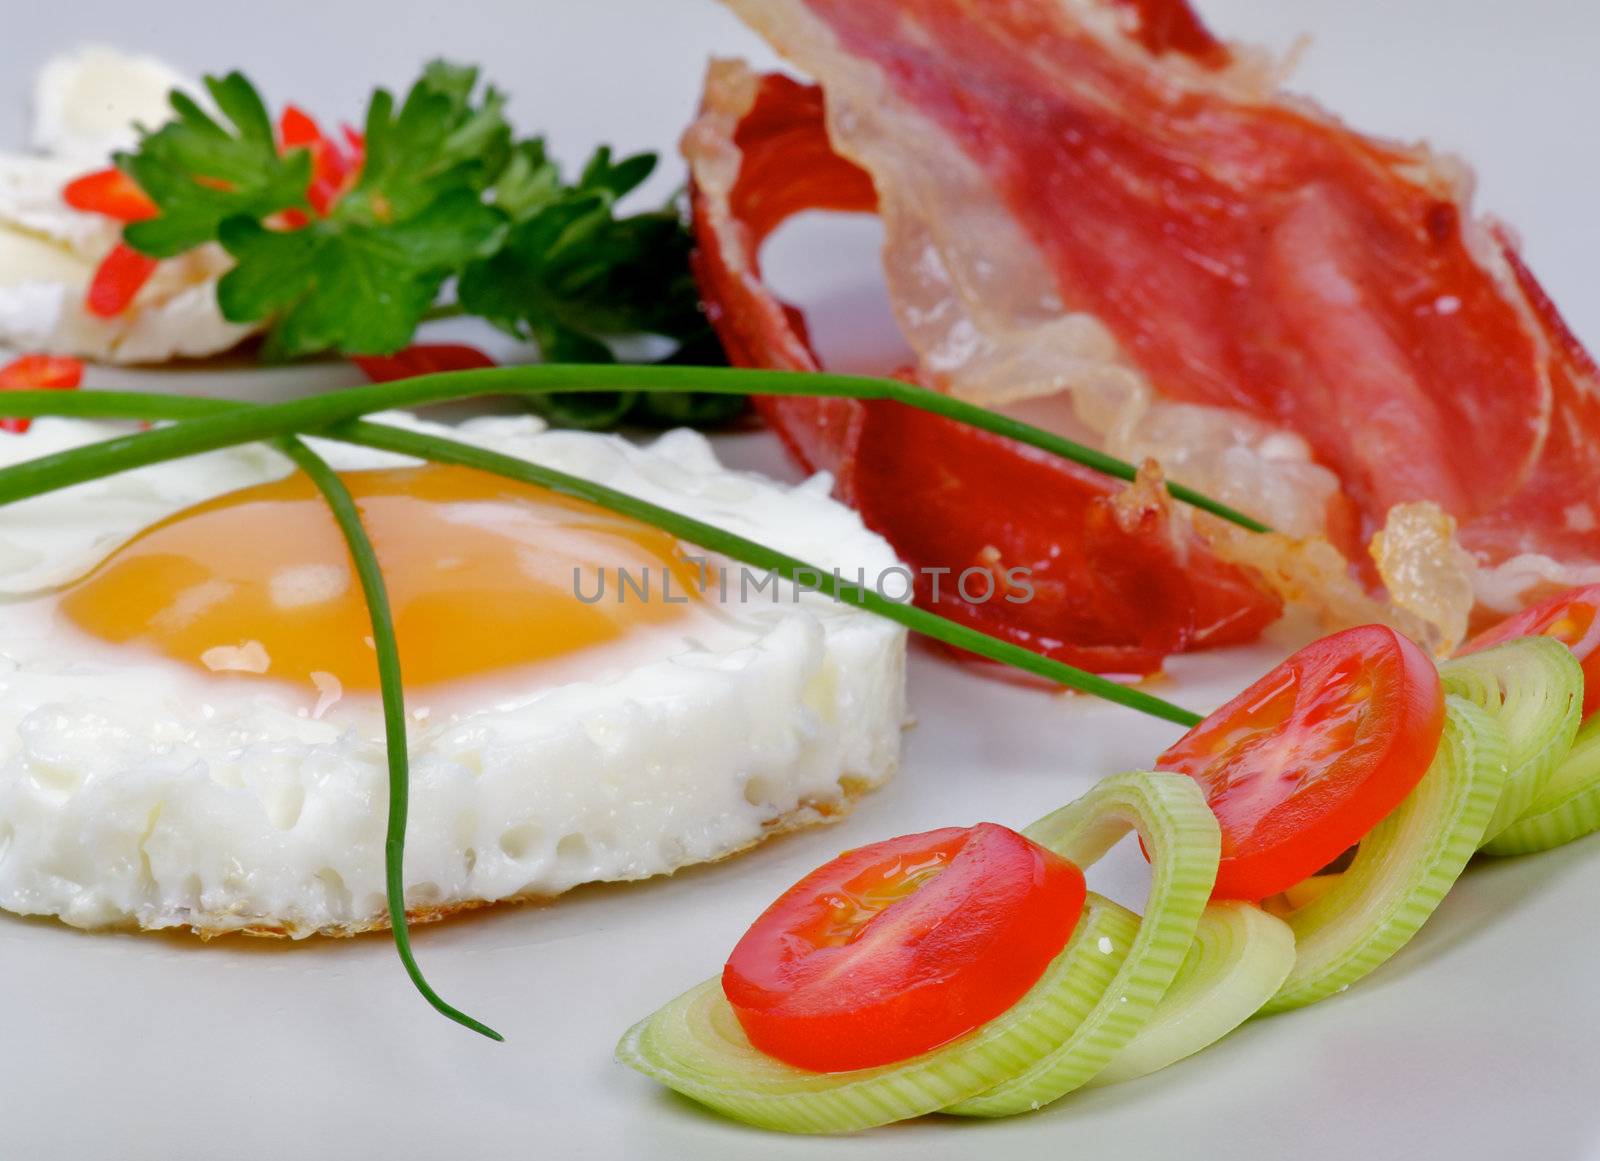 Fried Eggs Sunny Side Up with greens and bacon by zhekos